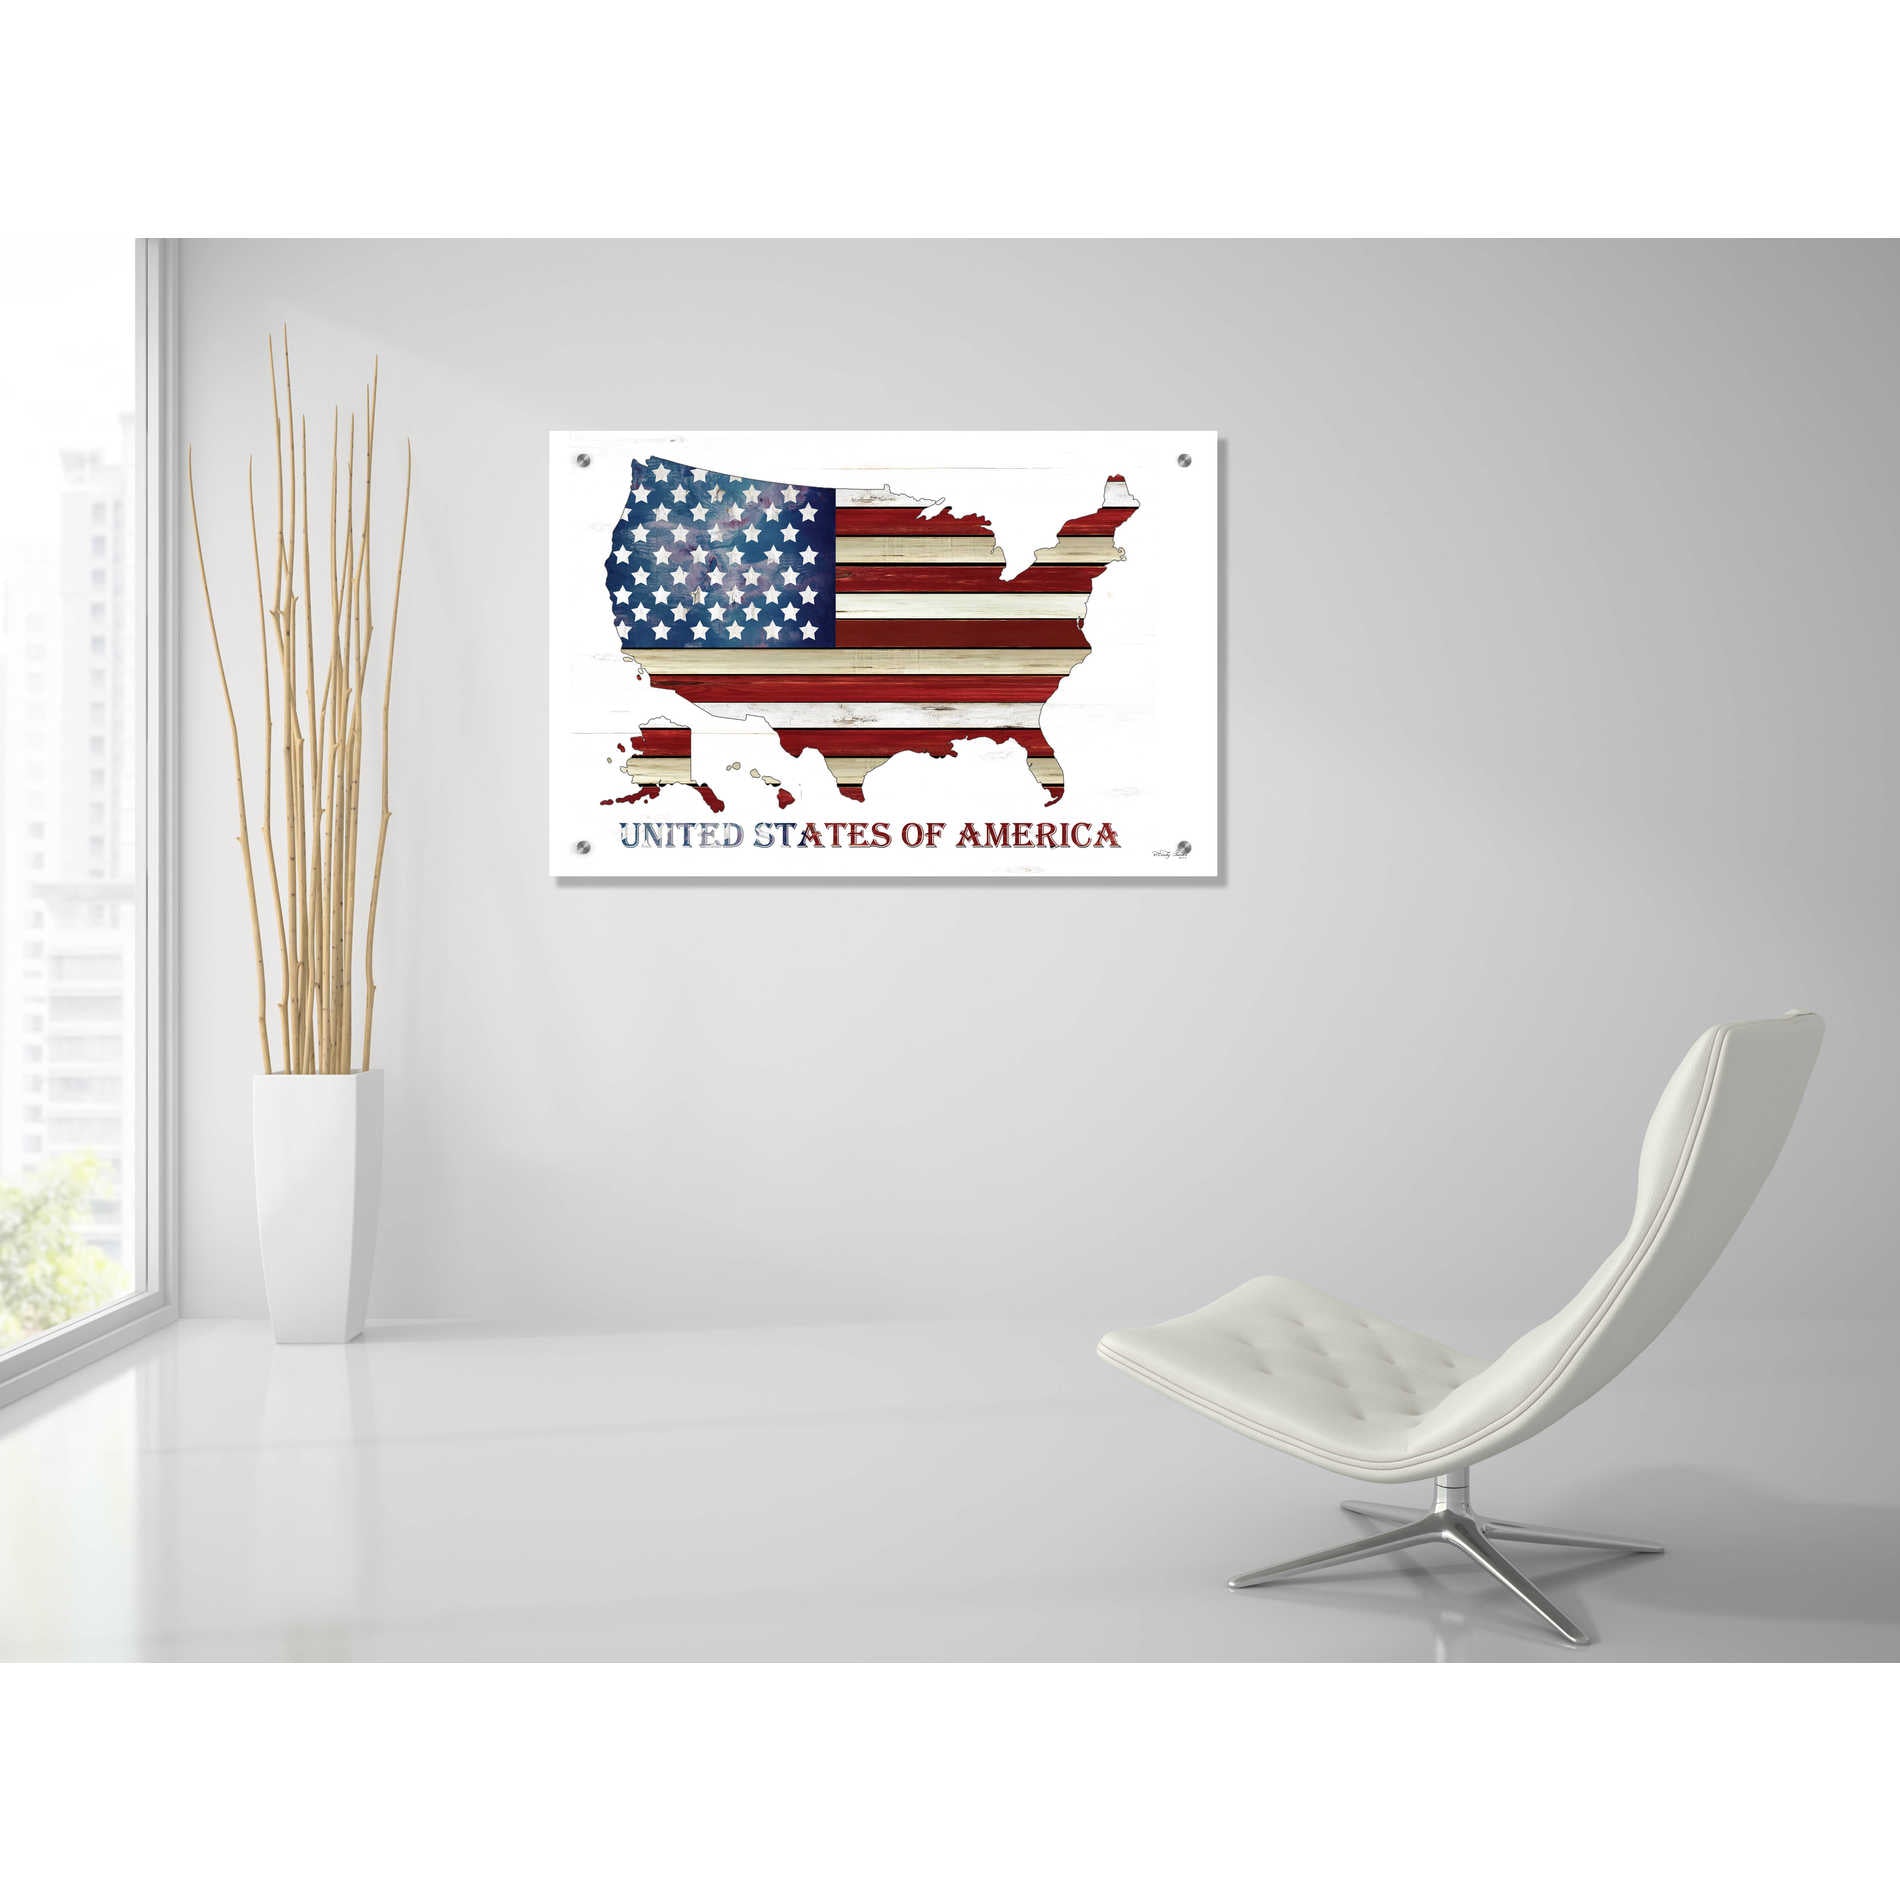 Epic Art 'United States of America' by Cindy Jacobs, Acrylic Glass Wall Art,36x24